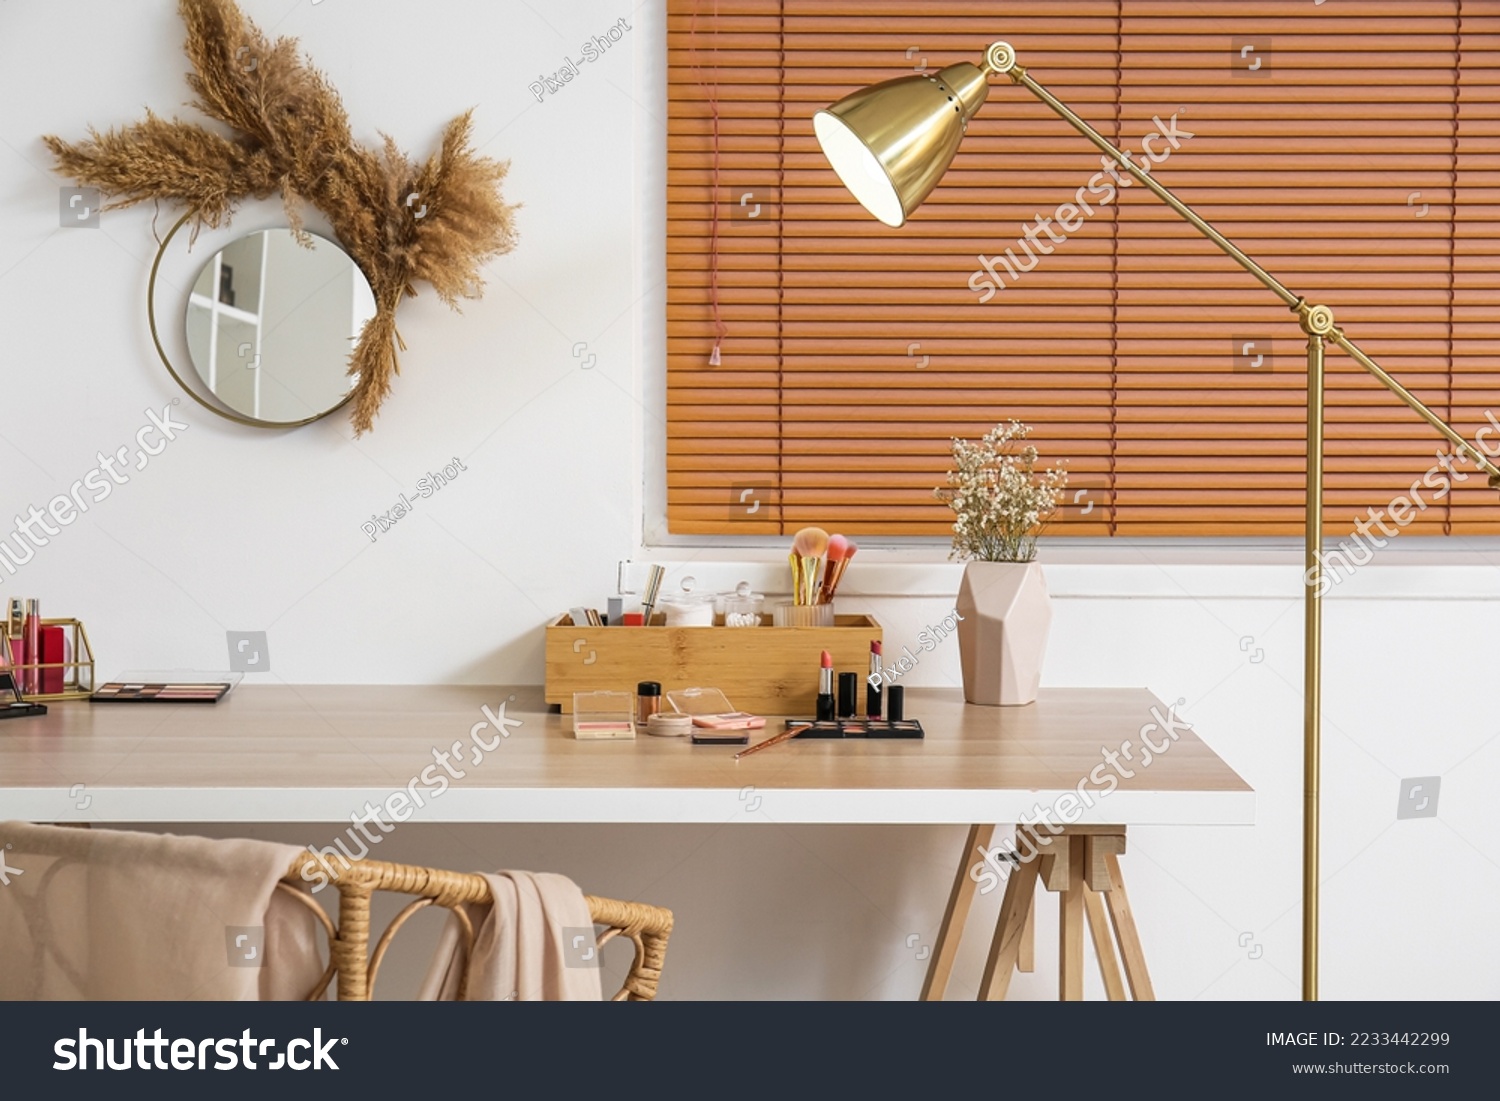 Box with makeup brushes, decorative cosmetics and flowers in vase on table near light wall #2233442299